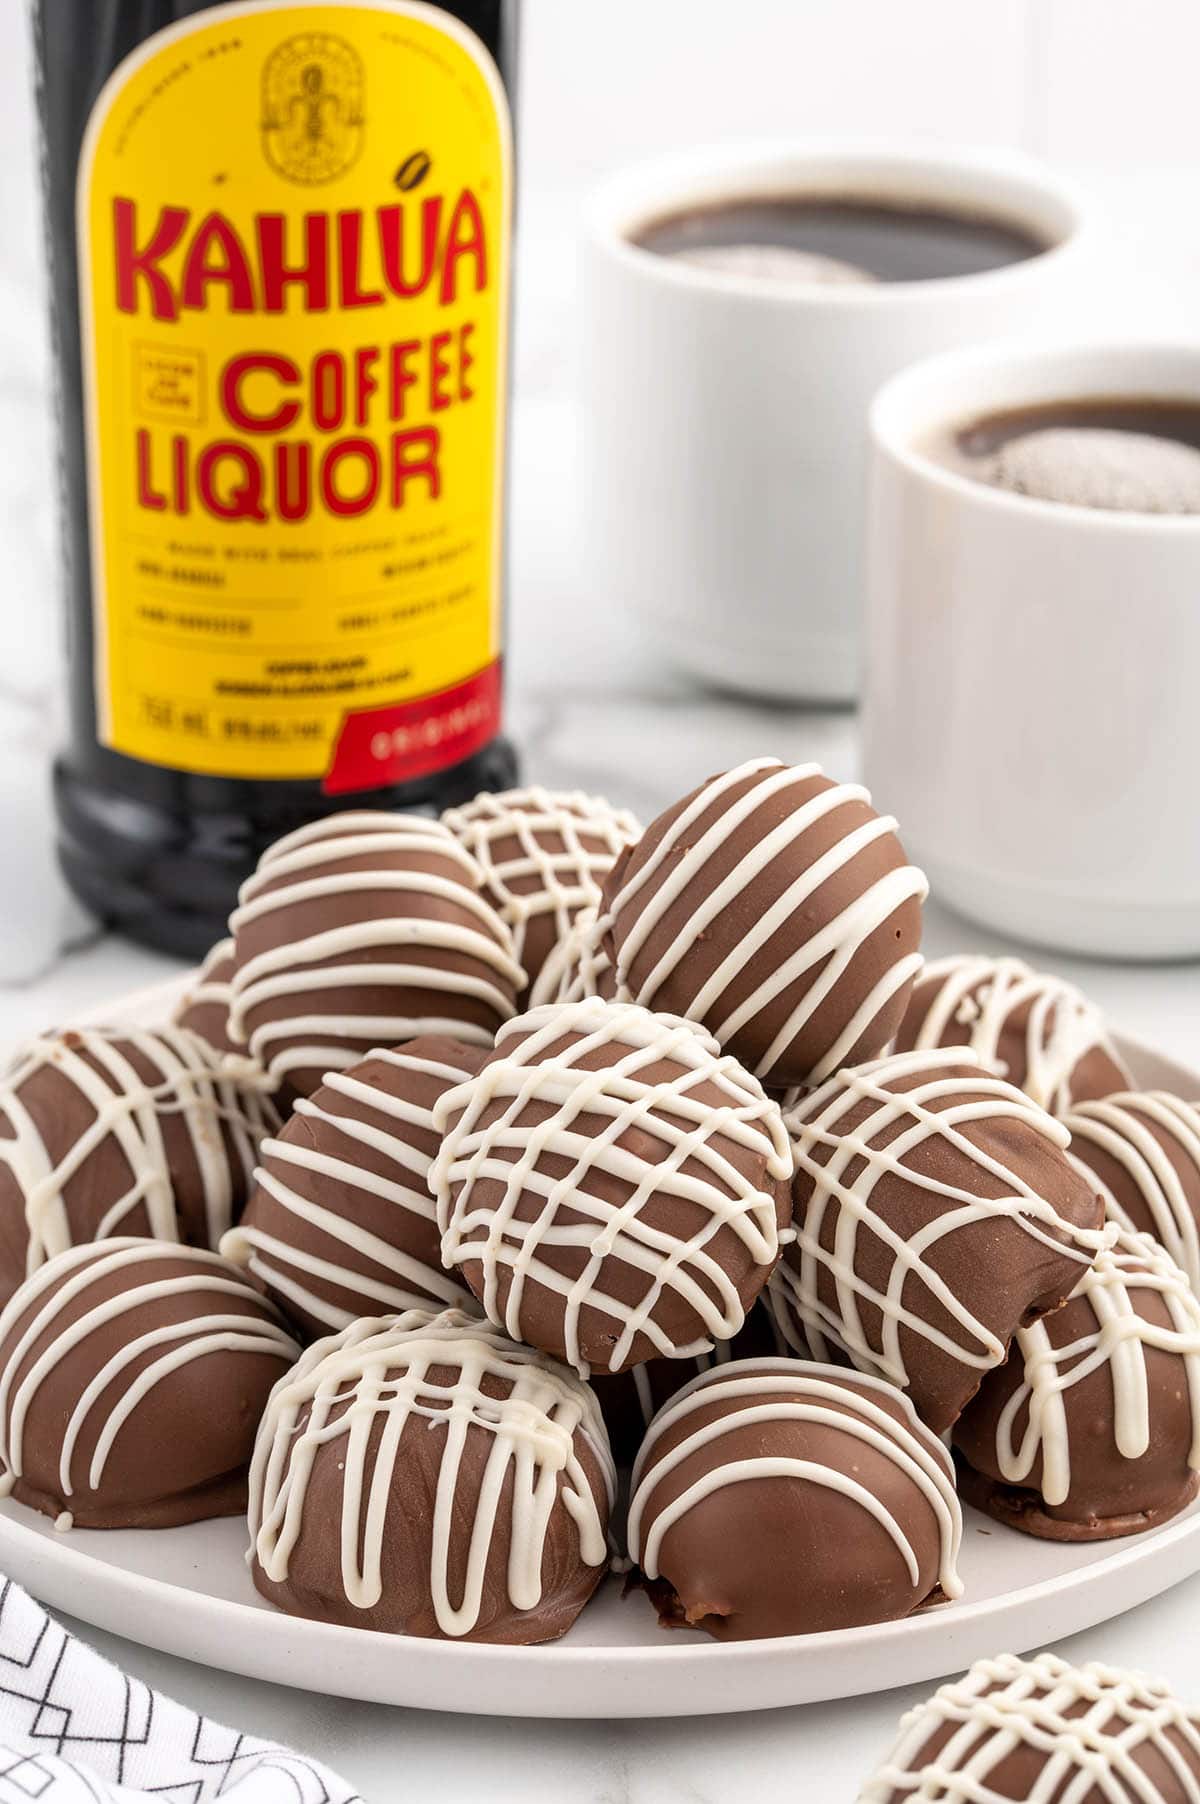 a couple of Kahlua Balls on a white plate with 2 mug of coffee and kahlua bottle on the background.